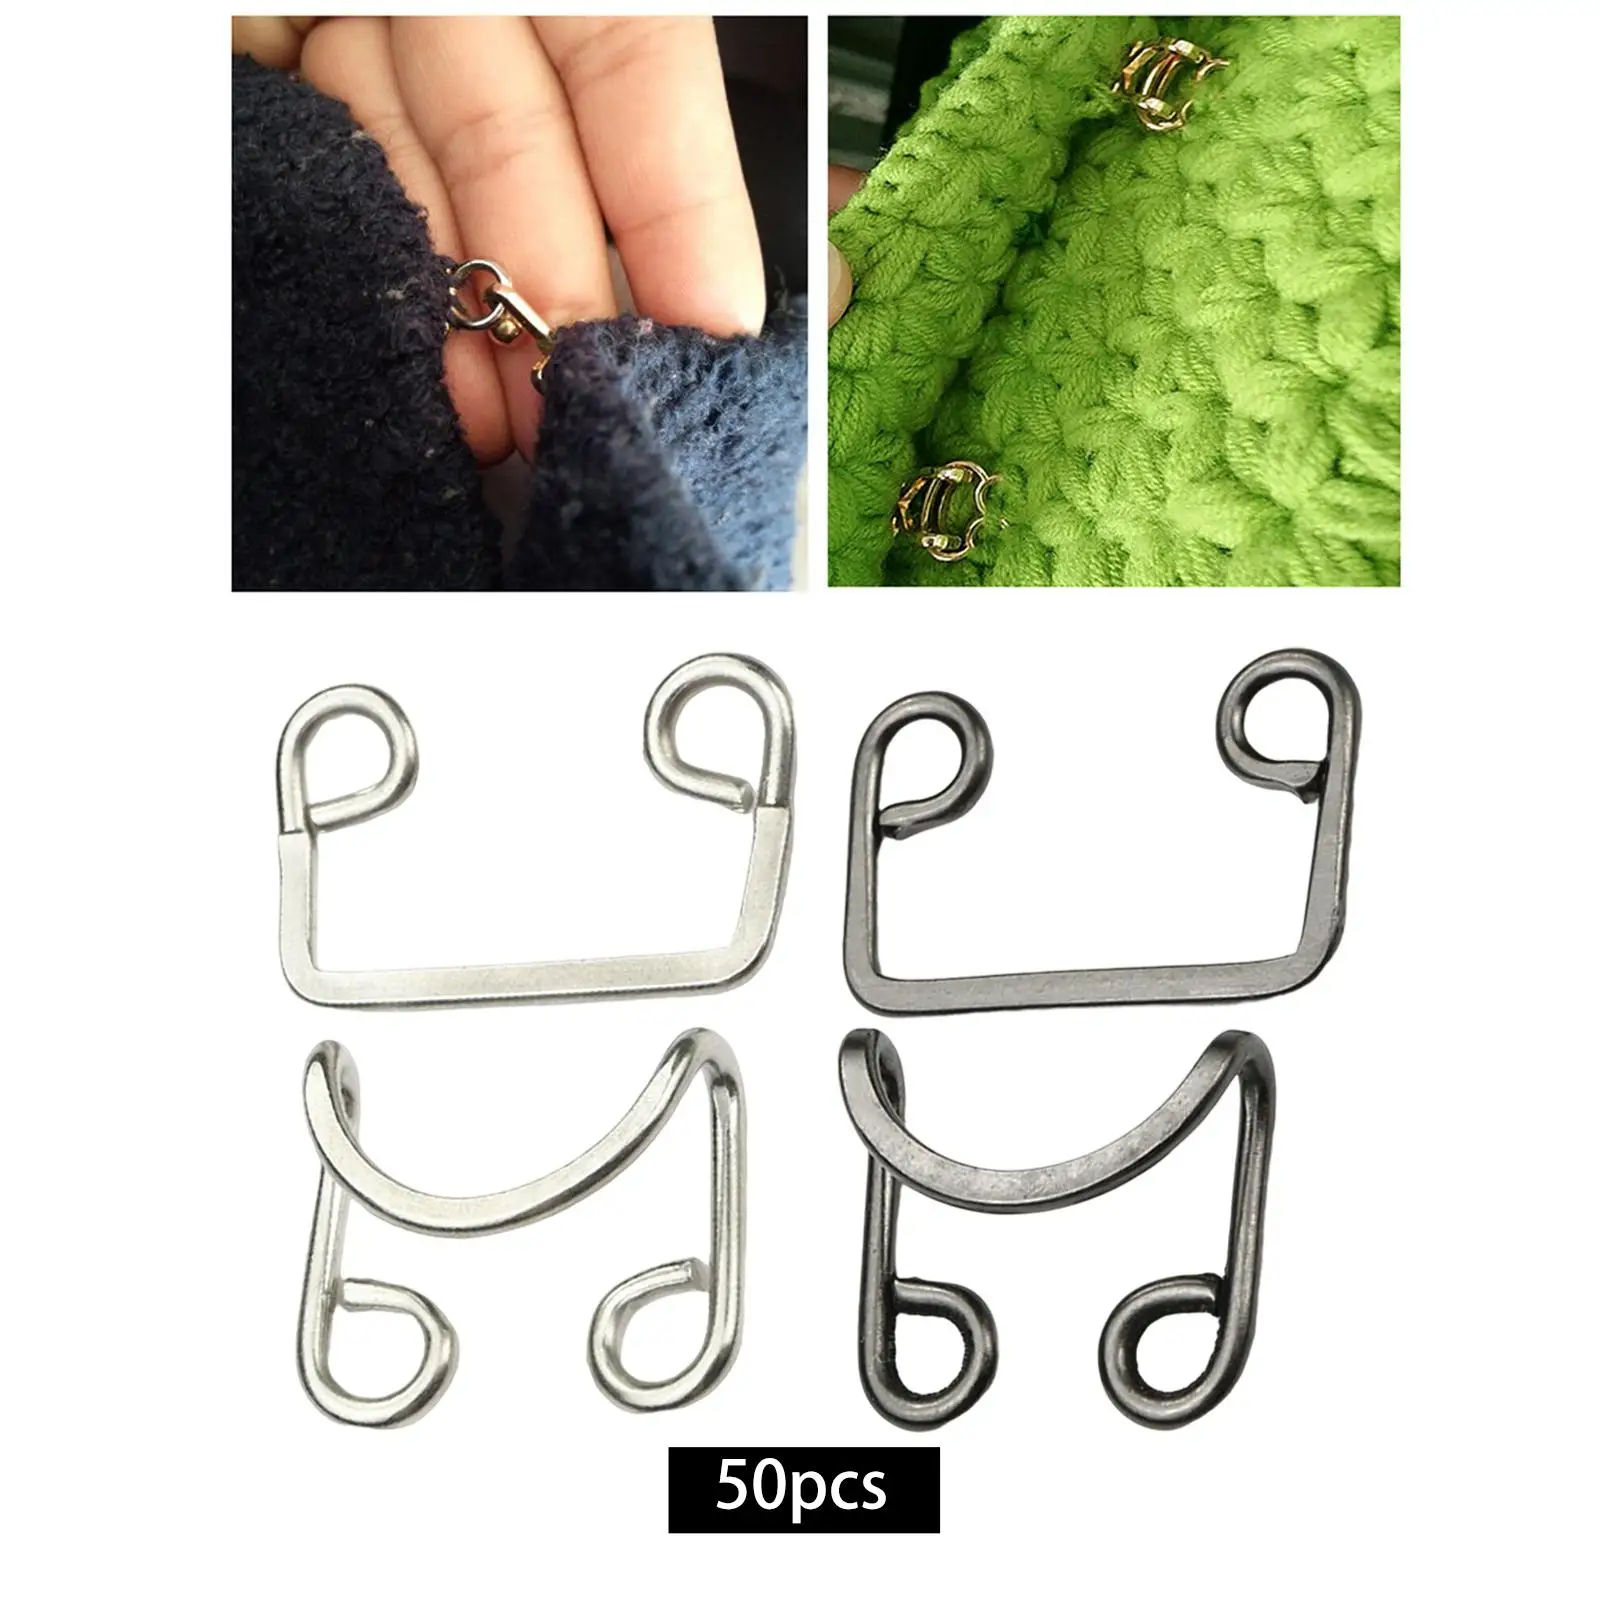 50 Pairs Metal Buckle Waist Fittings Adjustable Sewing Hook Button Collar Clasp for Fabric Crafts Underwear Pants Extender Jeans